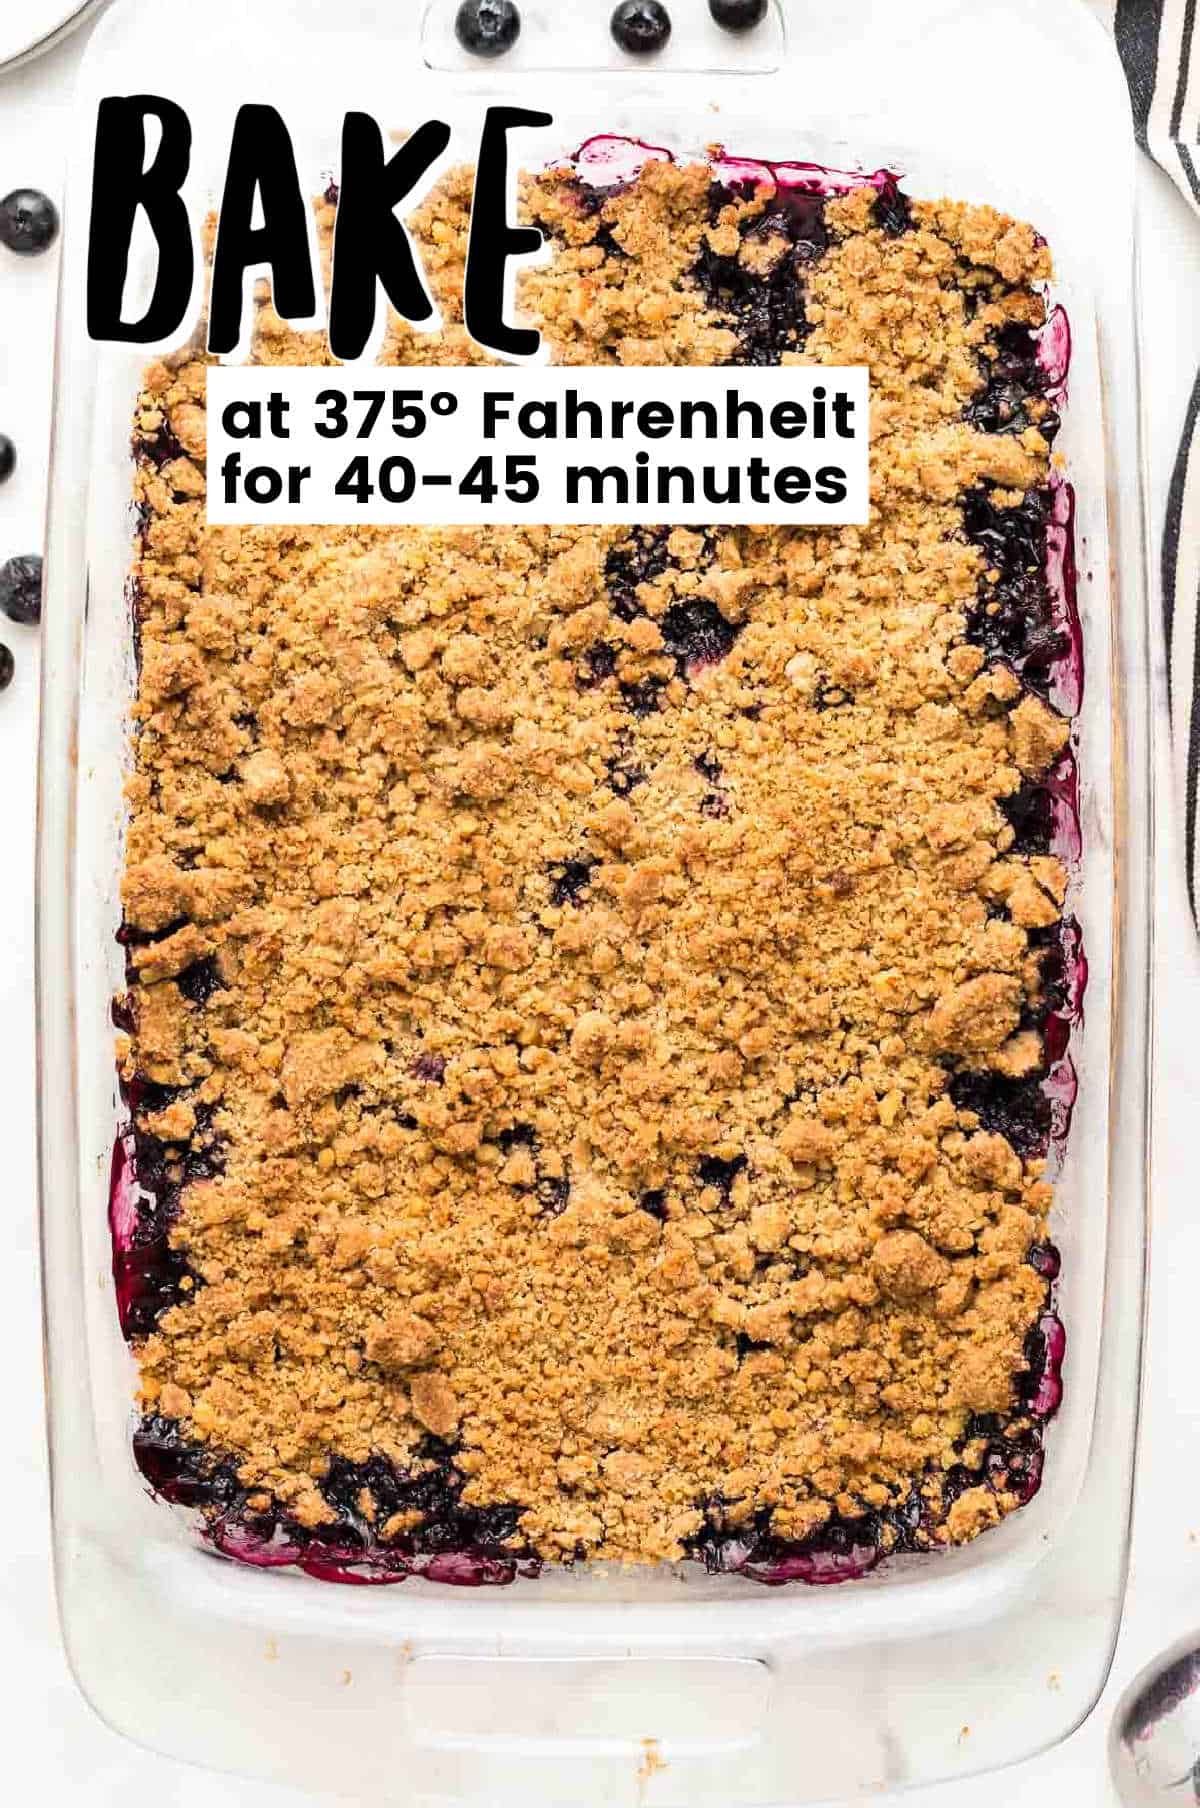 Step: Blueberry Crisp ready to be baked - 40-45 minutes at 375º Fahrenheit